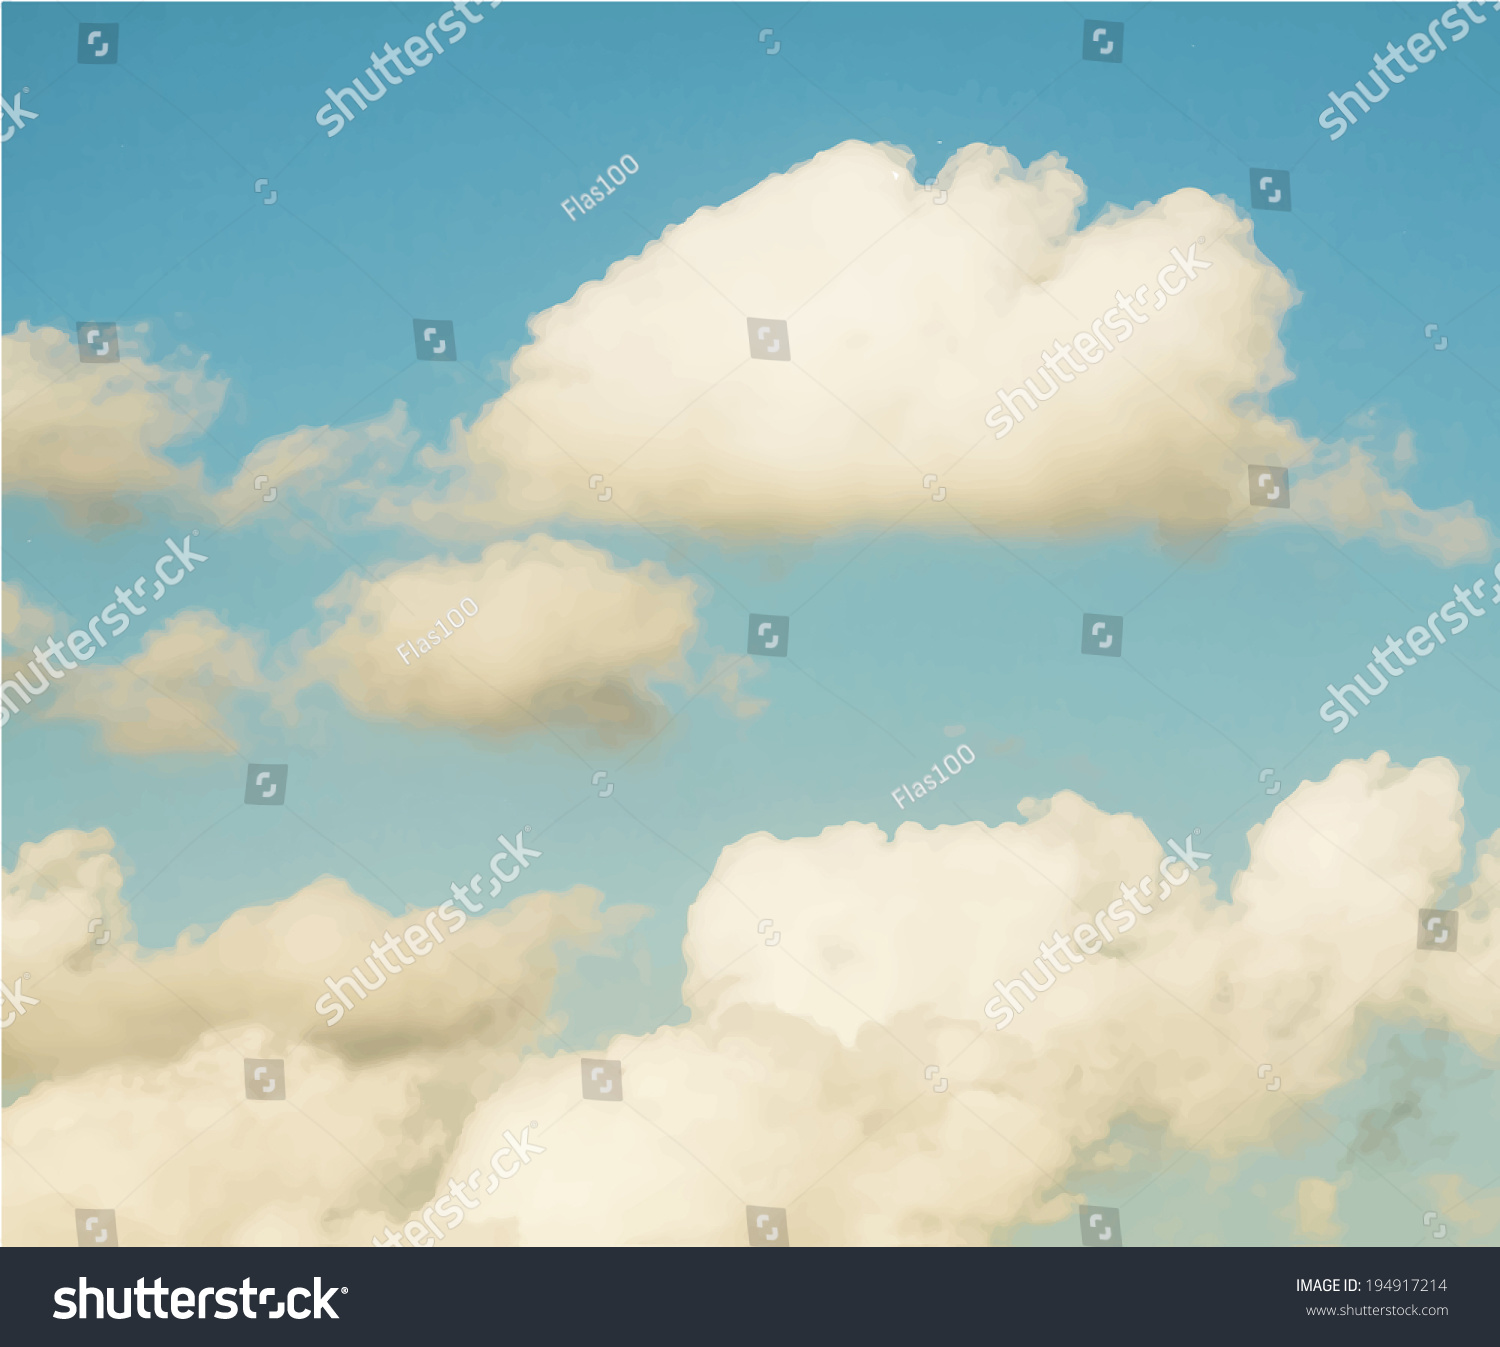 Vintage Clouds Sky Vector Background Stock Vector 194917214 ...